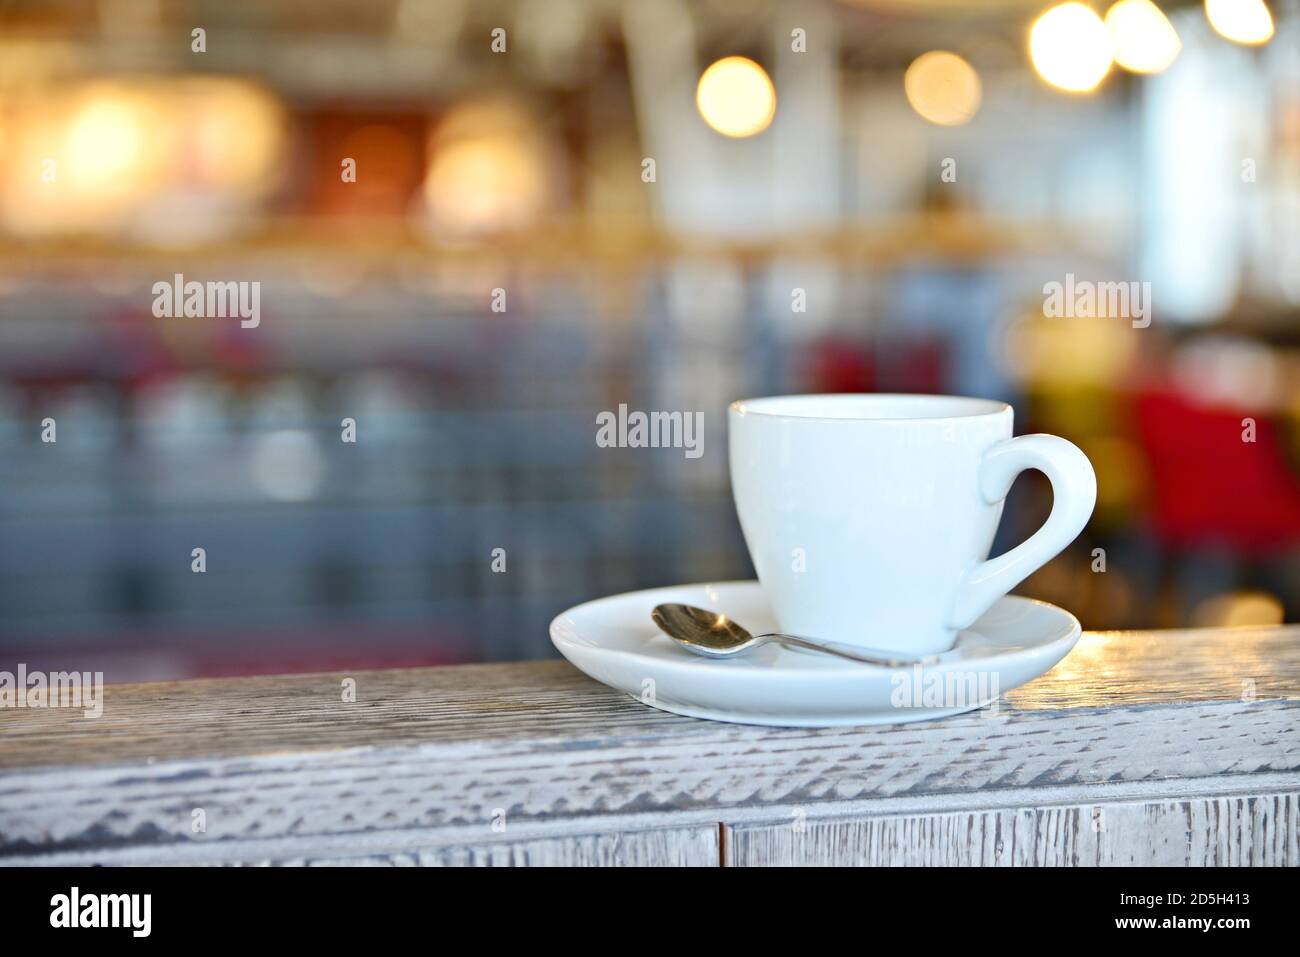 Coffee cup in Prague cafe 2020. Coffee cup in Prague cafe 2020. White mug with coffee on a white saucer. Hot coffee in a mug. Romantic background with Stock Photo